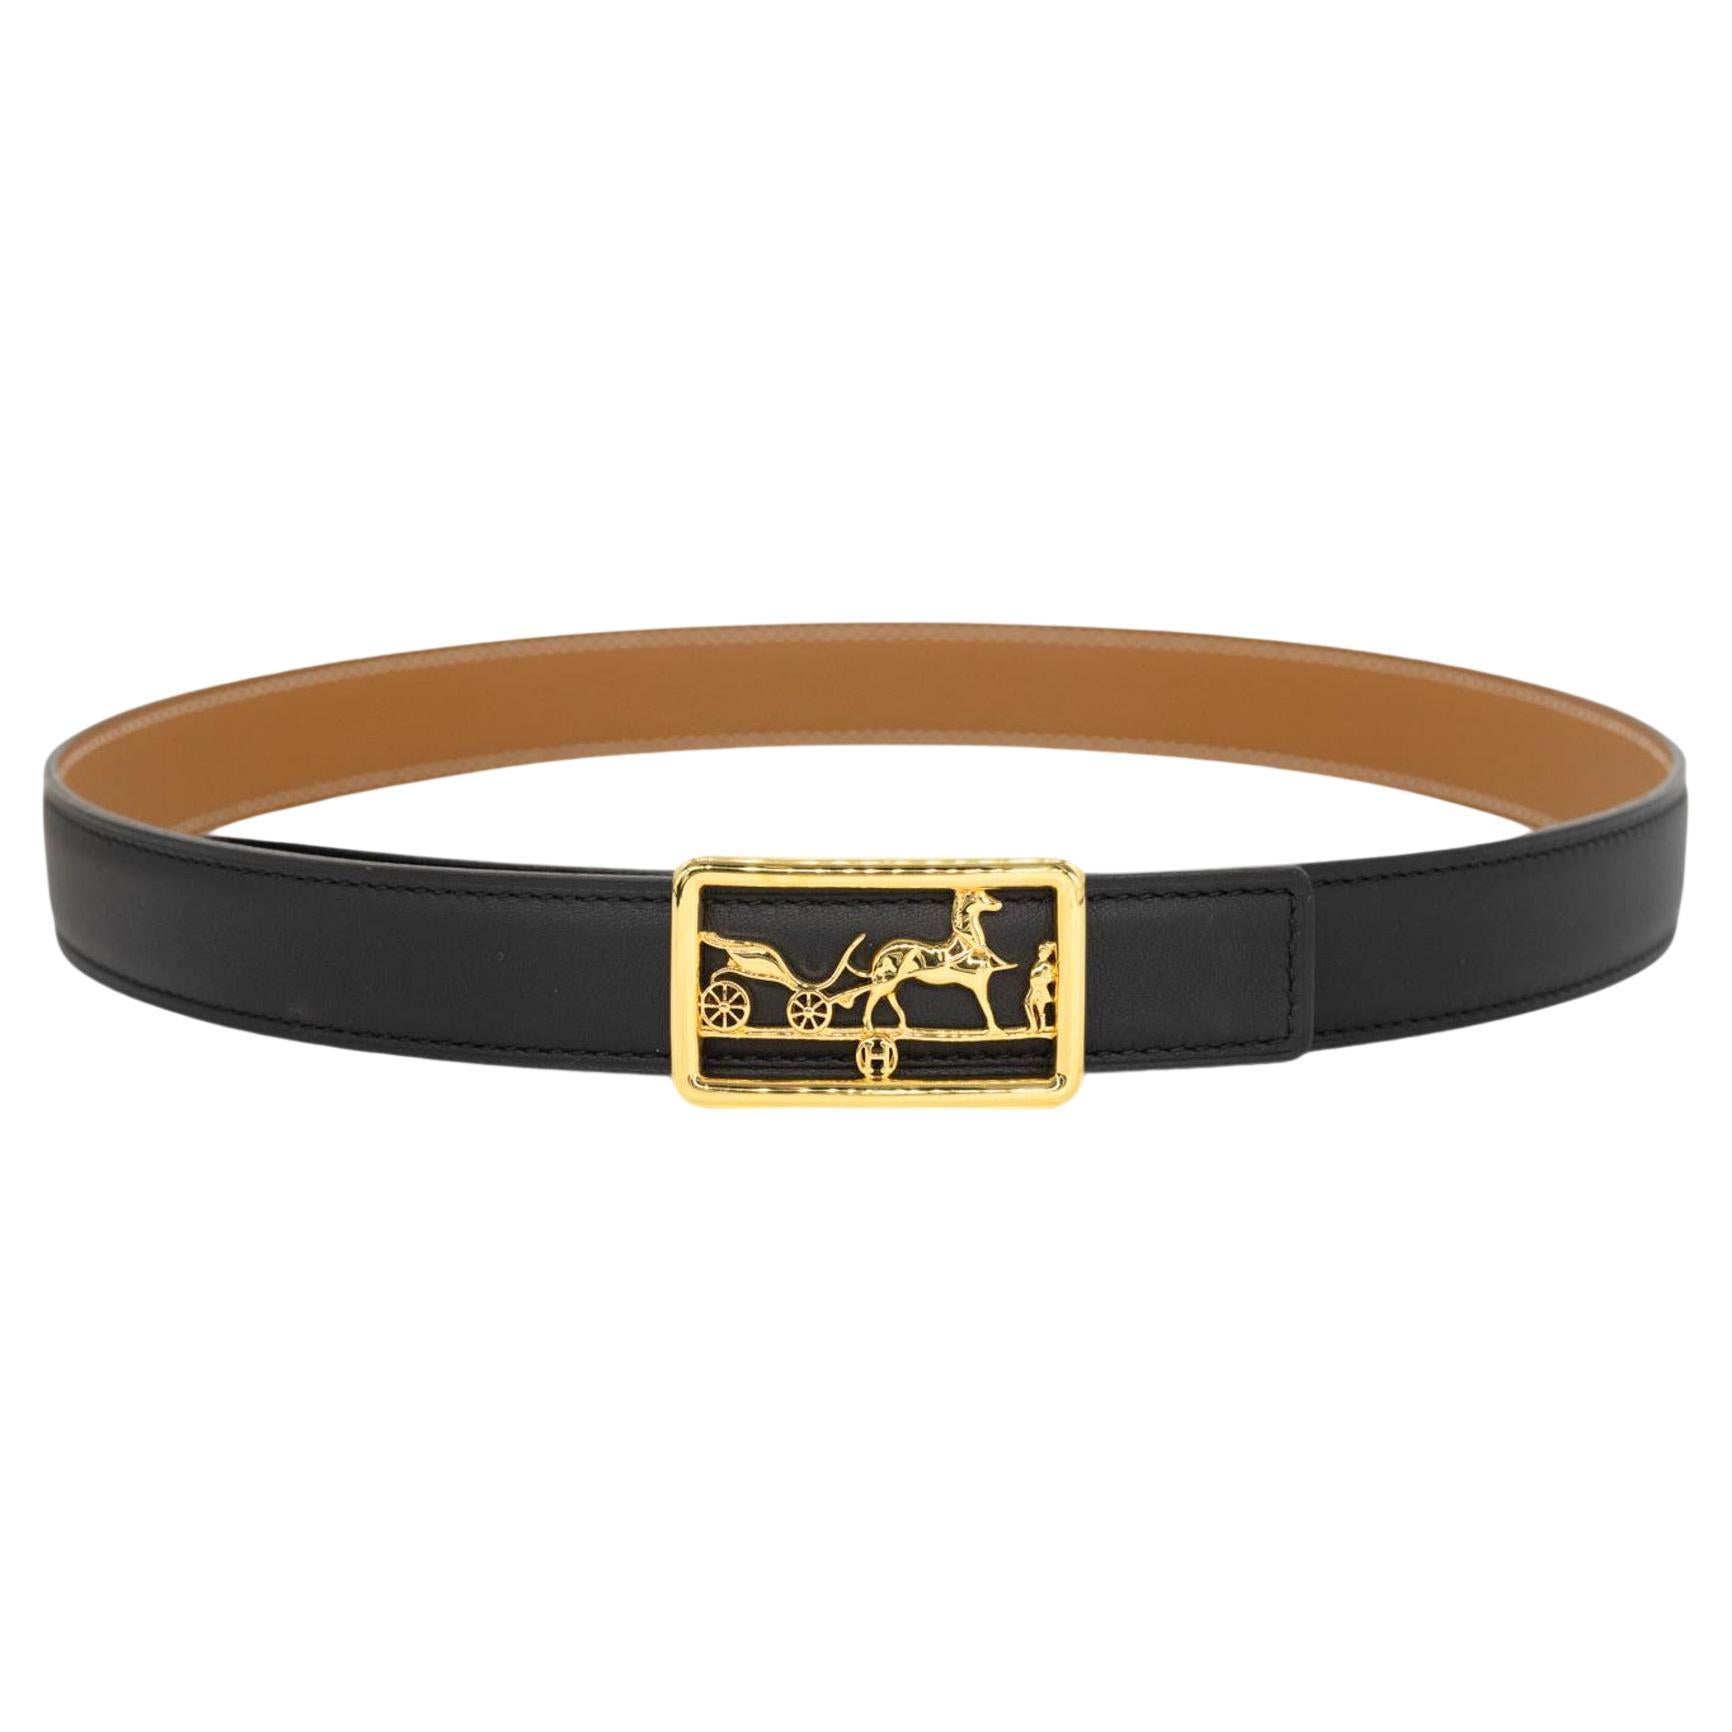 Hermès Black Swift Leather Caleche Buckle Belt "75" CM with Gold Hardware, 2019.